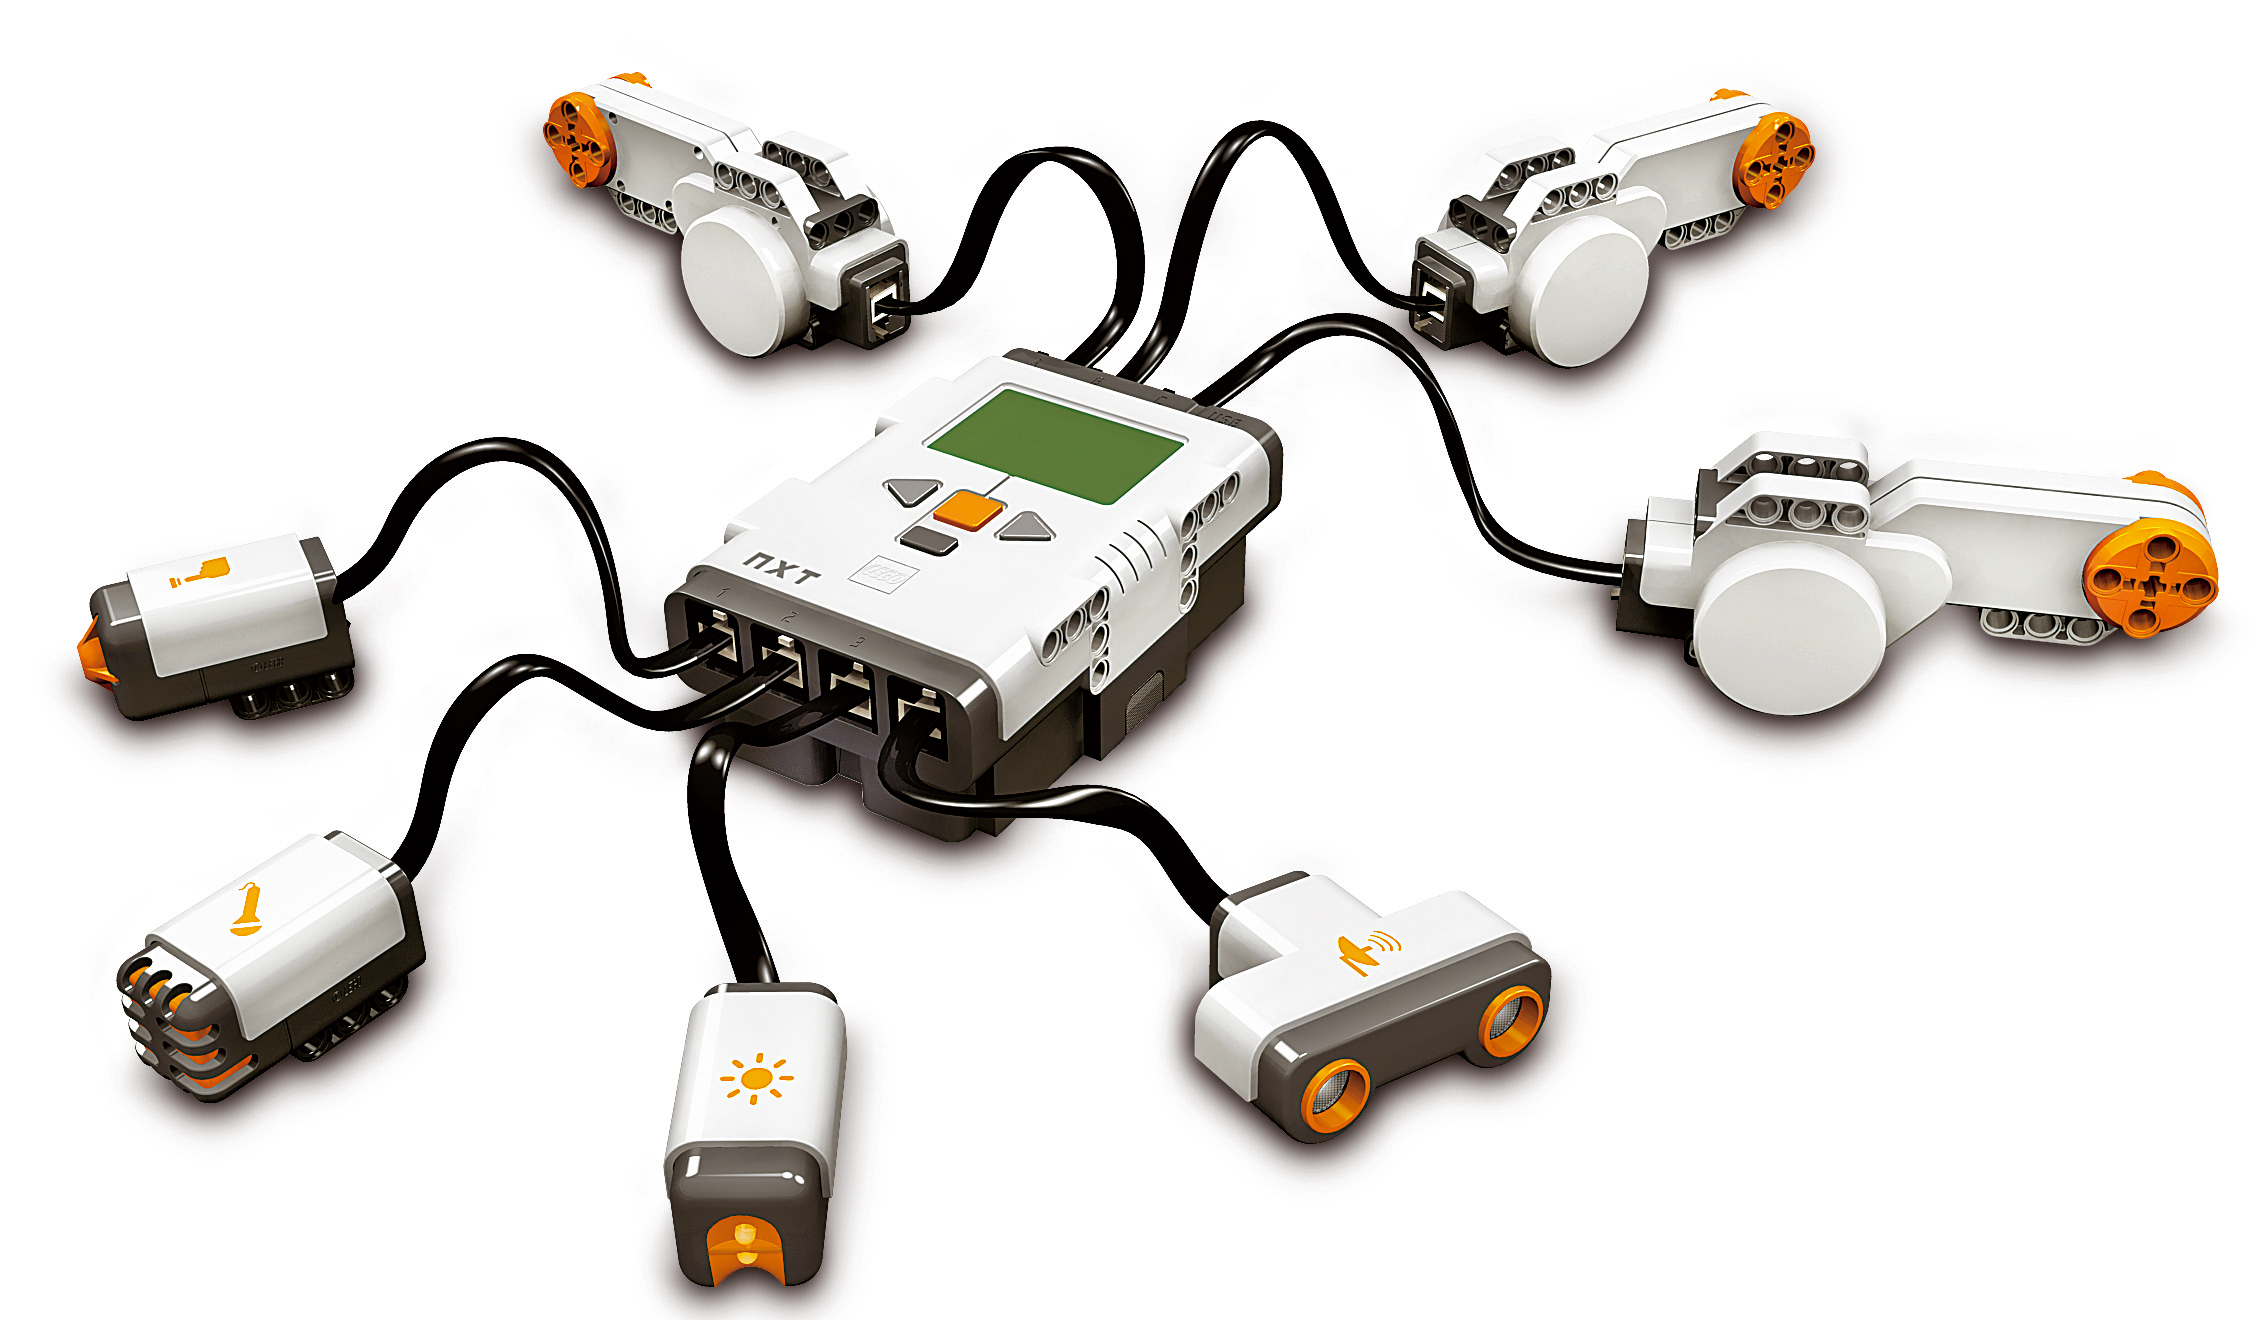 LEGO Mindstorms NXT Education